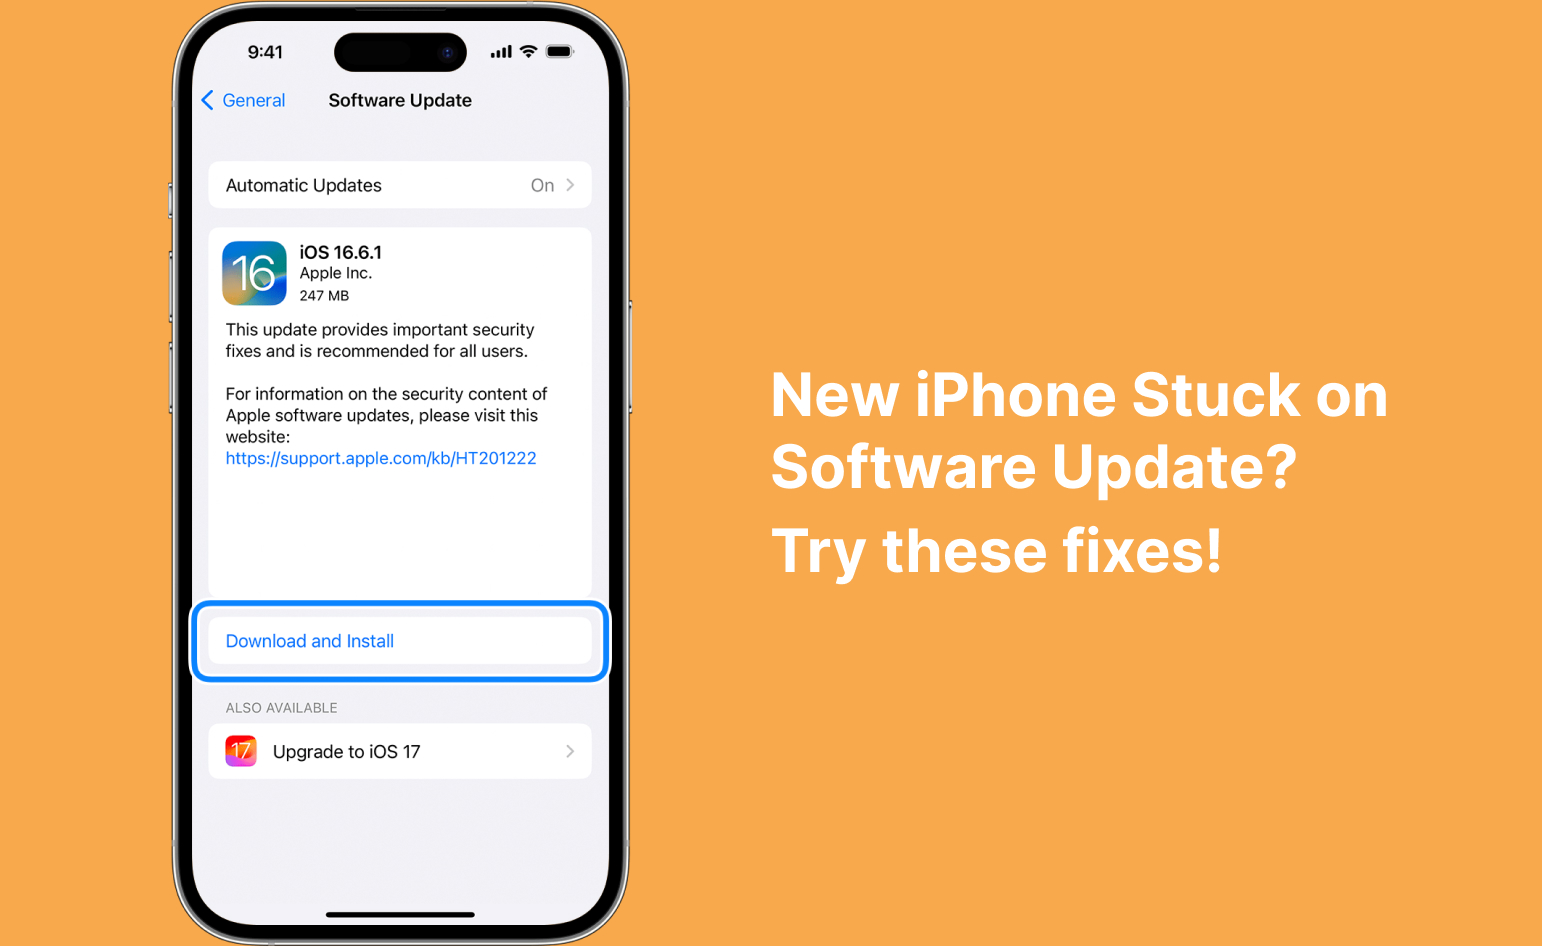 New iPhone Stuck on Software Update? Easy Ways to Fix It